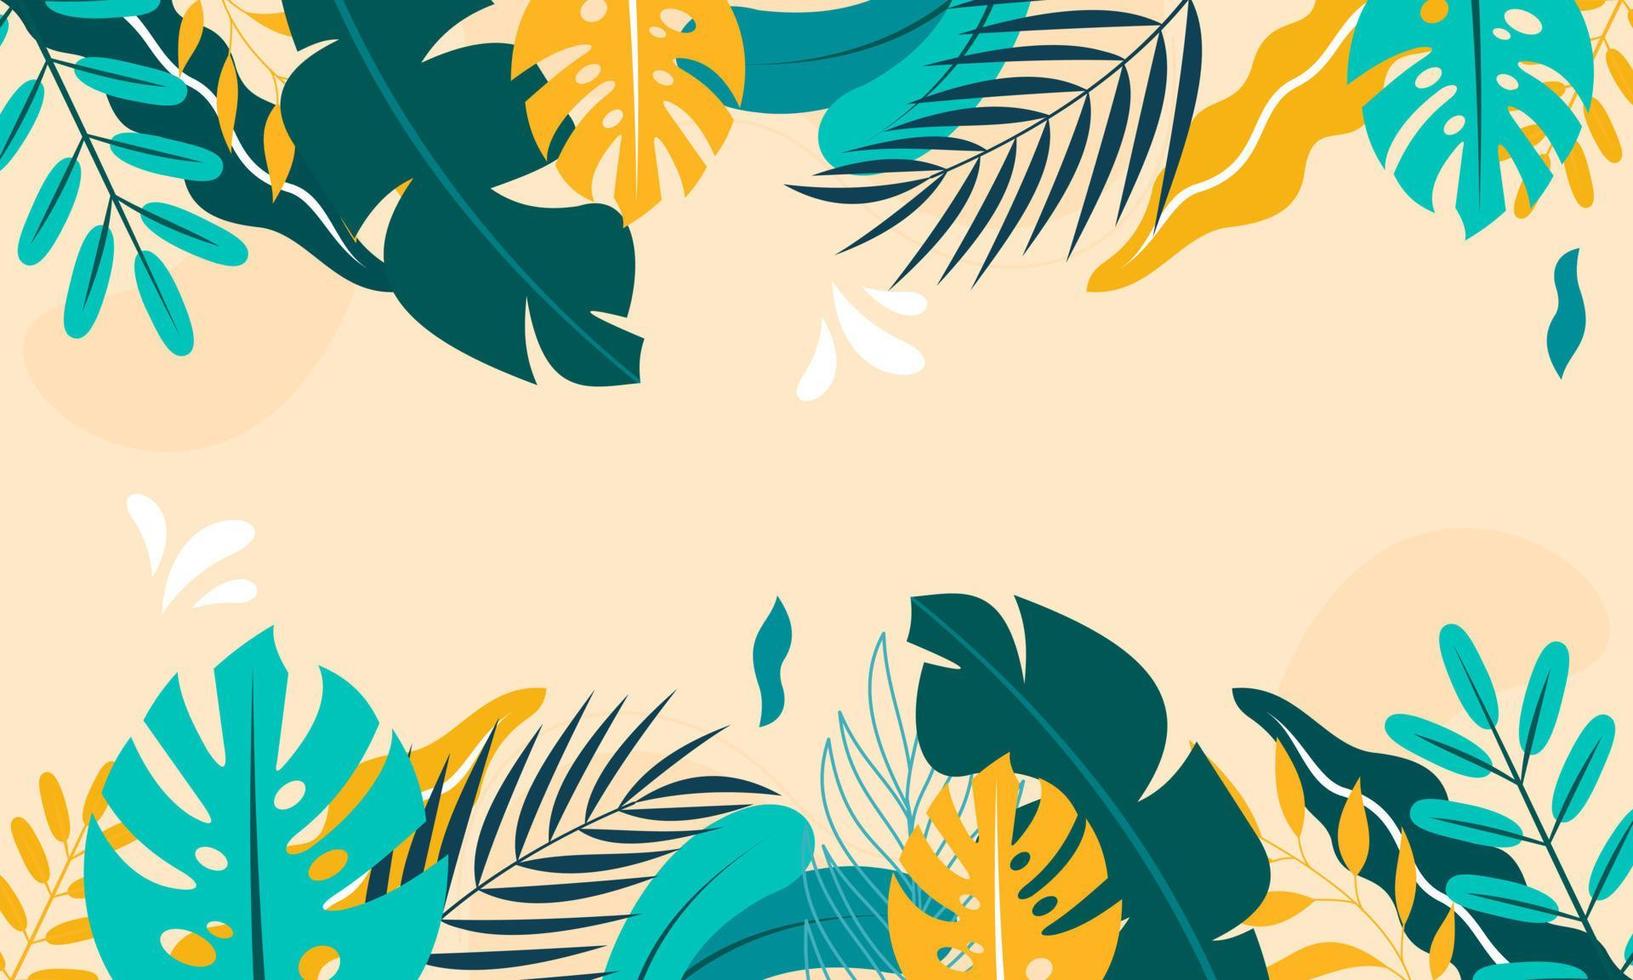 Flat tropical leaves background vector